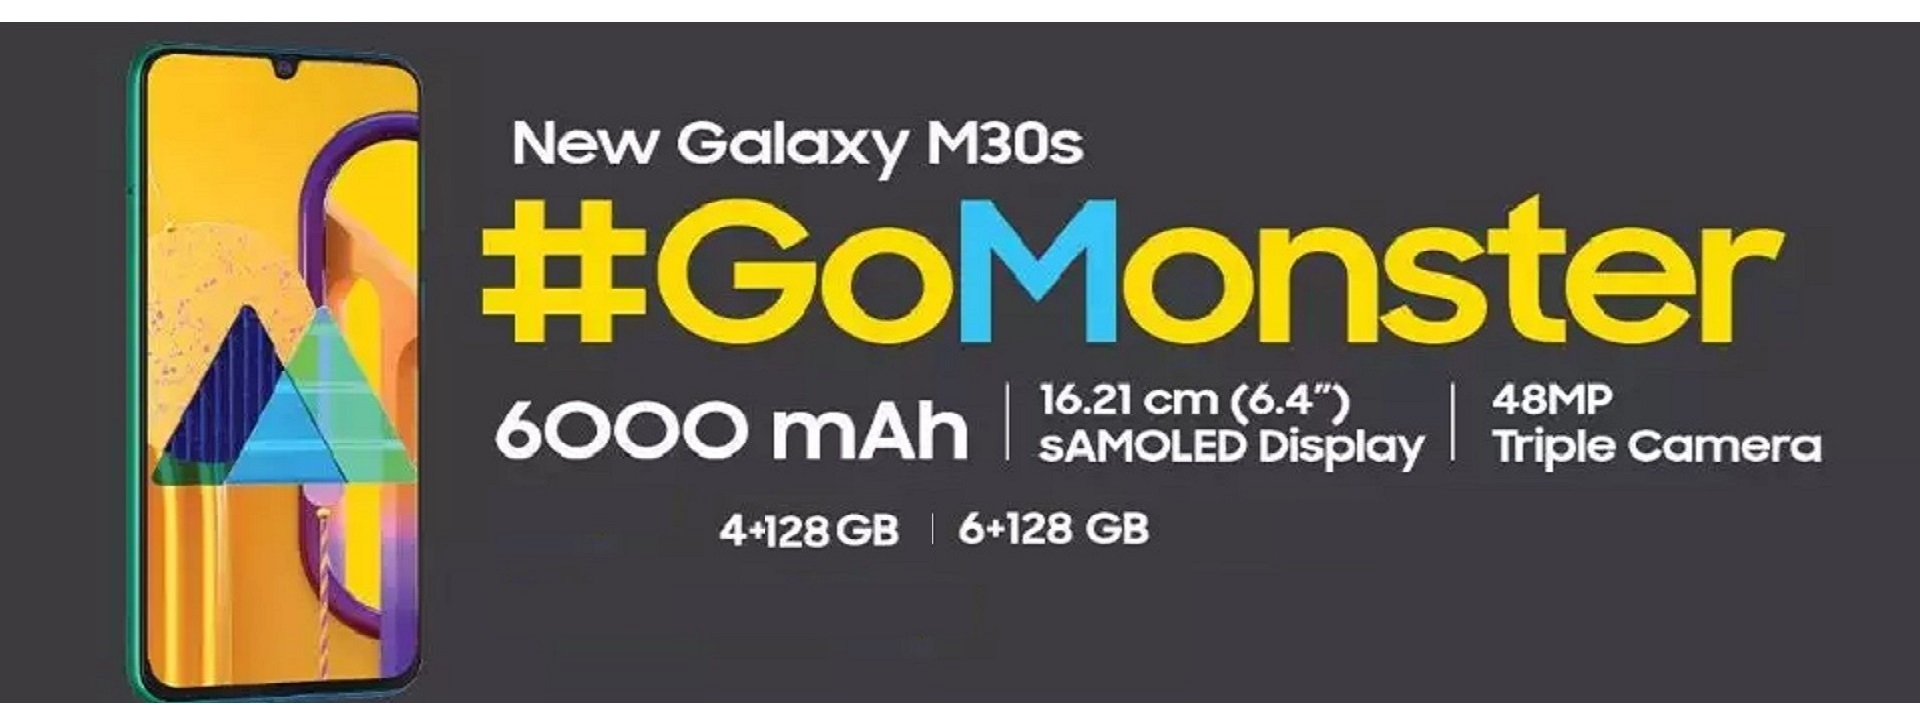 Samsung Galaxy M30s available for sale available soon